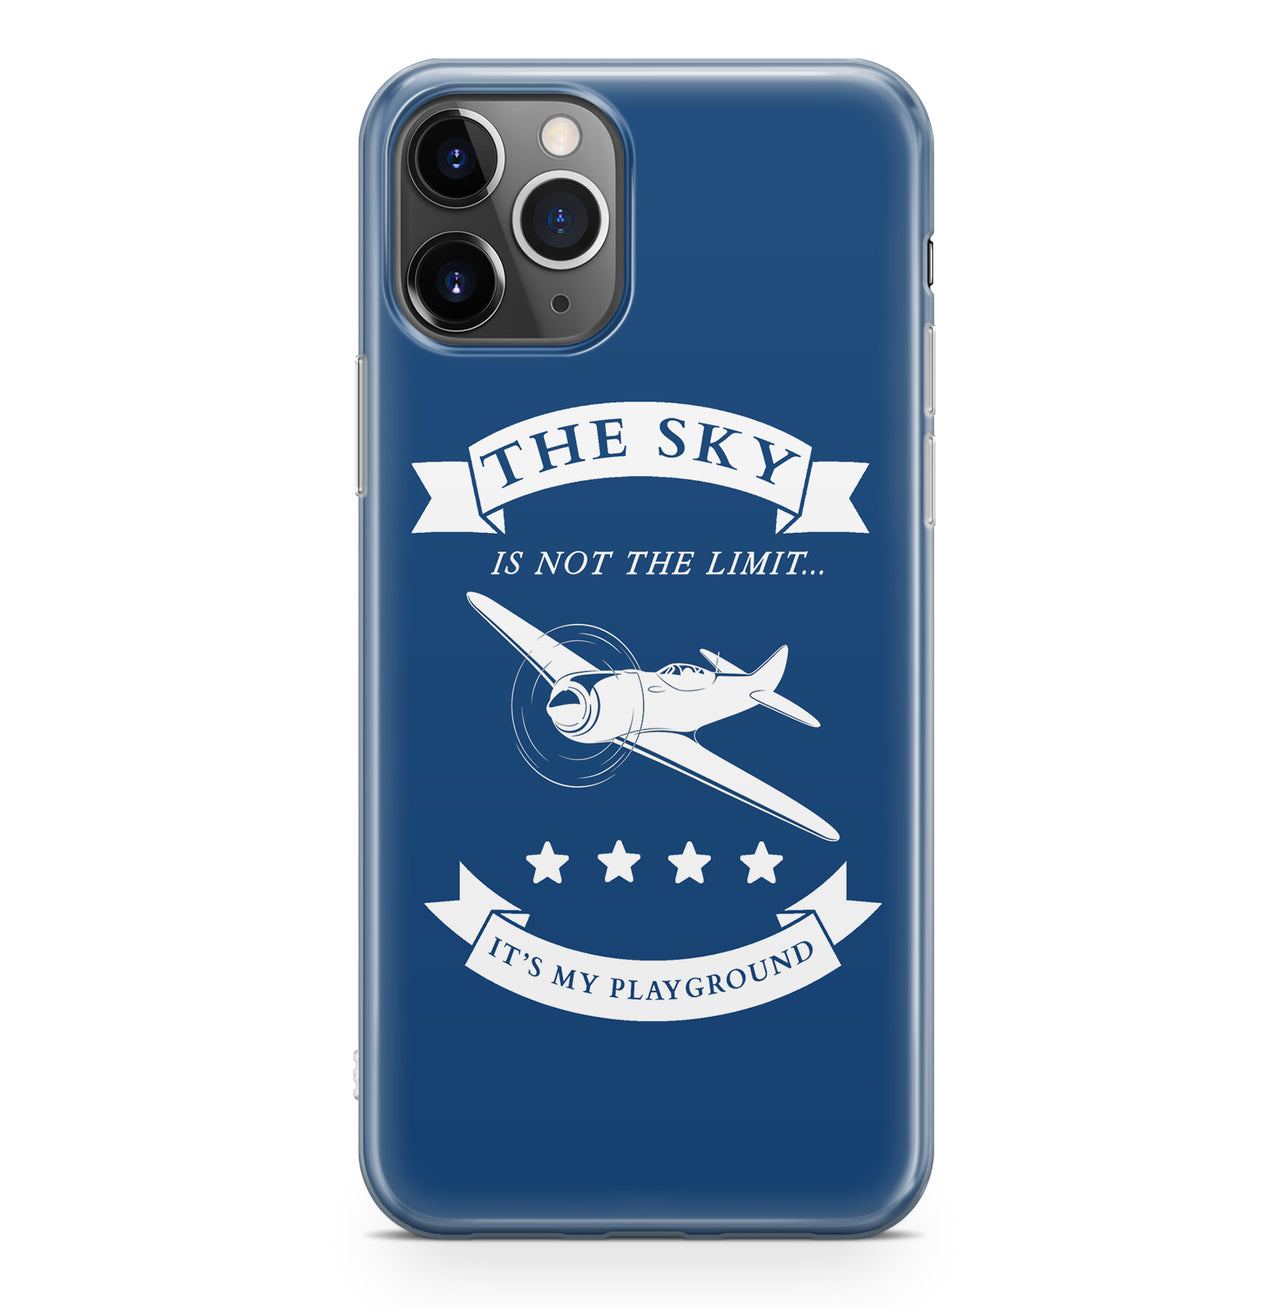 The Sky is not the limit, It's my playground Designed iPhone Cases